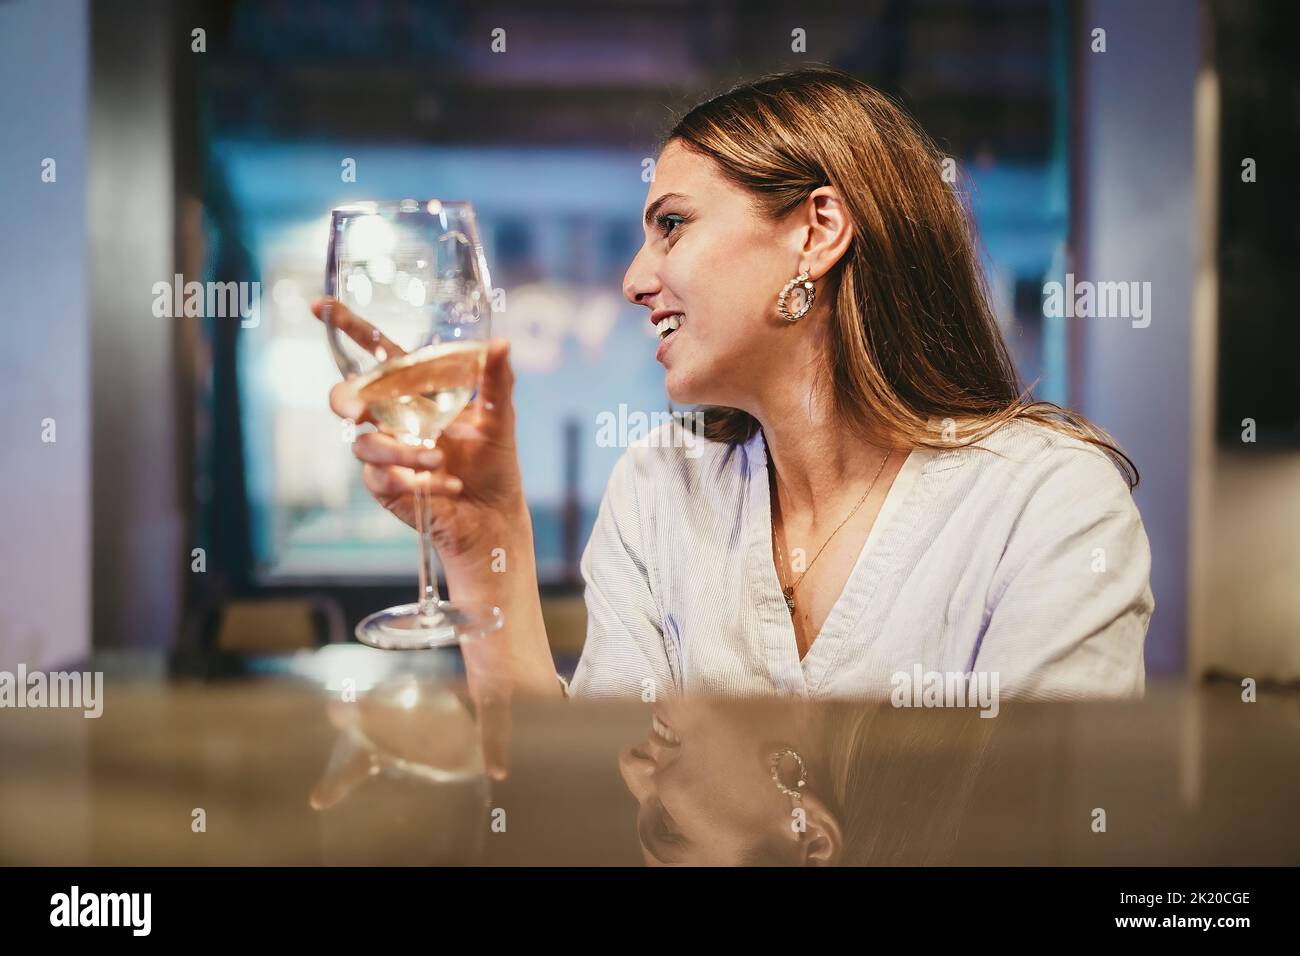 Portrait of a long haired young adult woman holding a glass of white wine sitting at restaurant counter - view from the counter - people and alcohol n Stock Photo